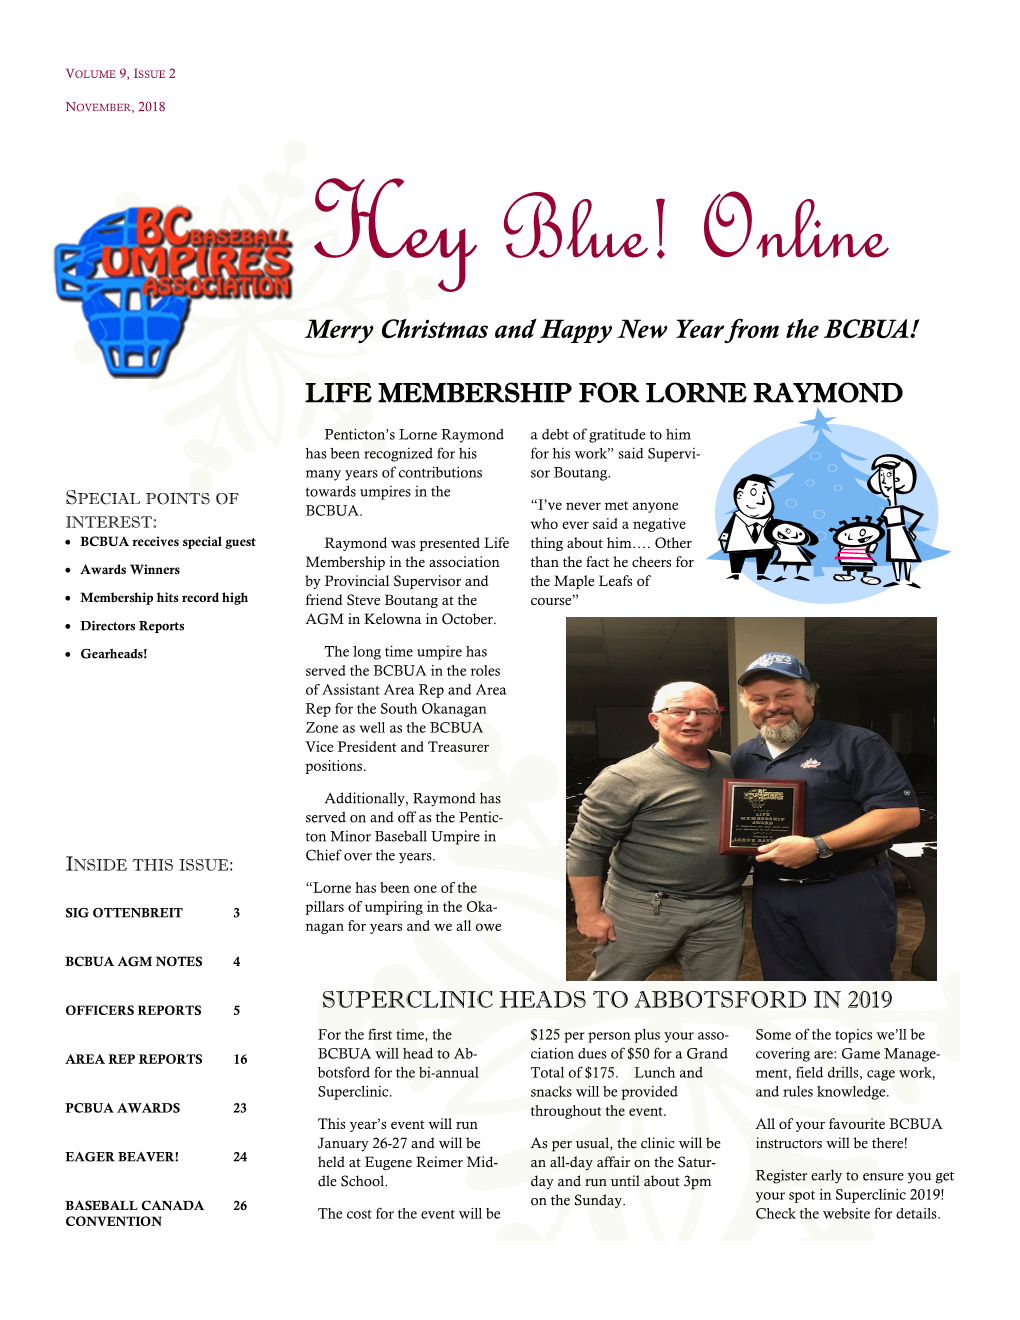 Hey Blue! Online Merry Christmas and Happy New Year from the BCBUA!